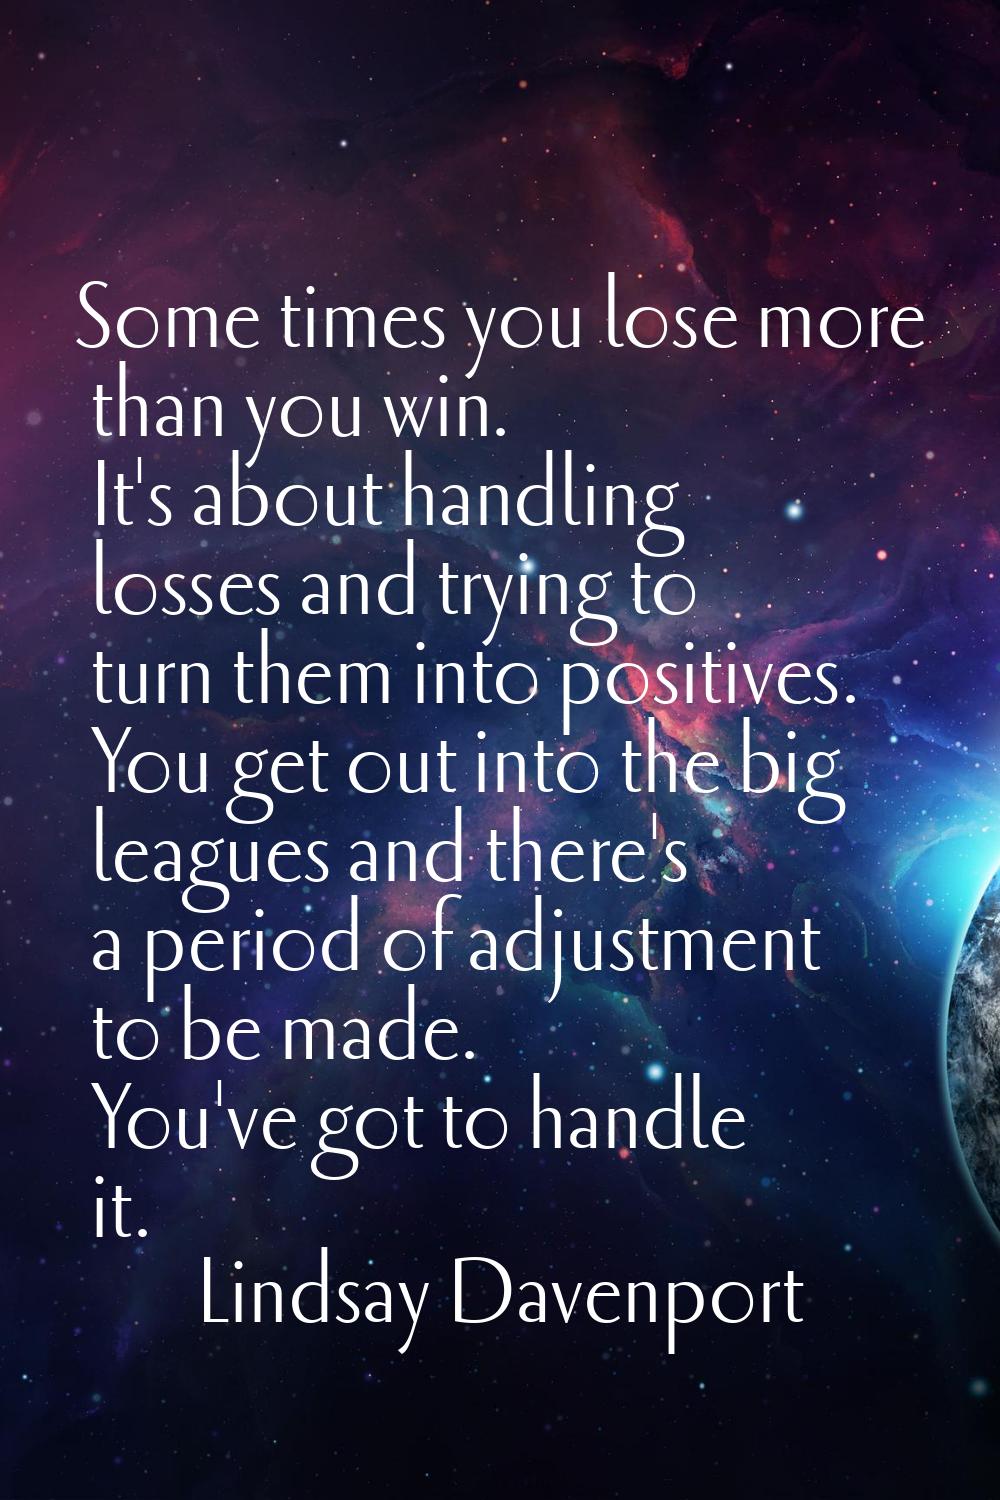 Some times you lose more than you win. It's about handling losses and trying to turn them into posi